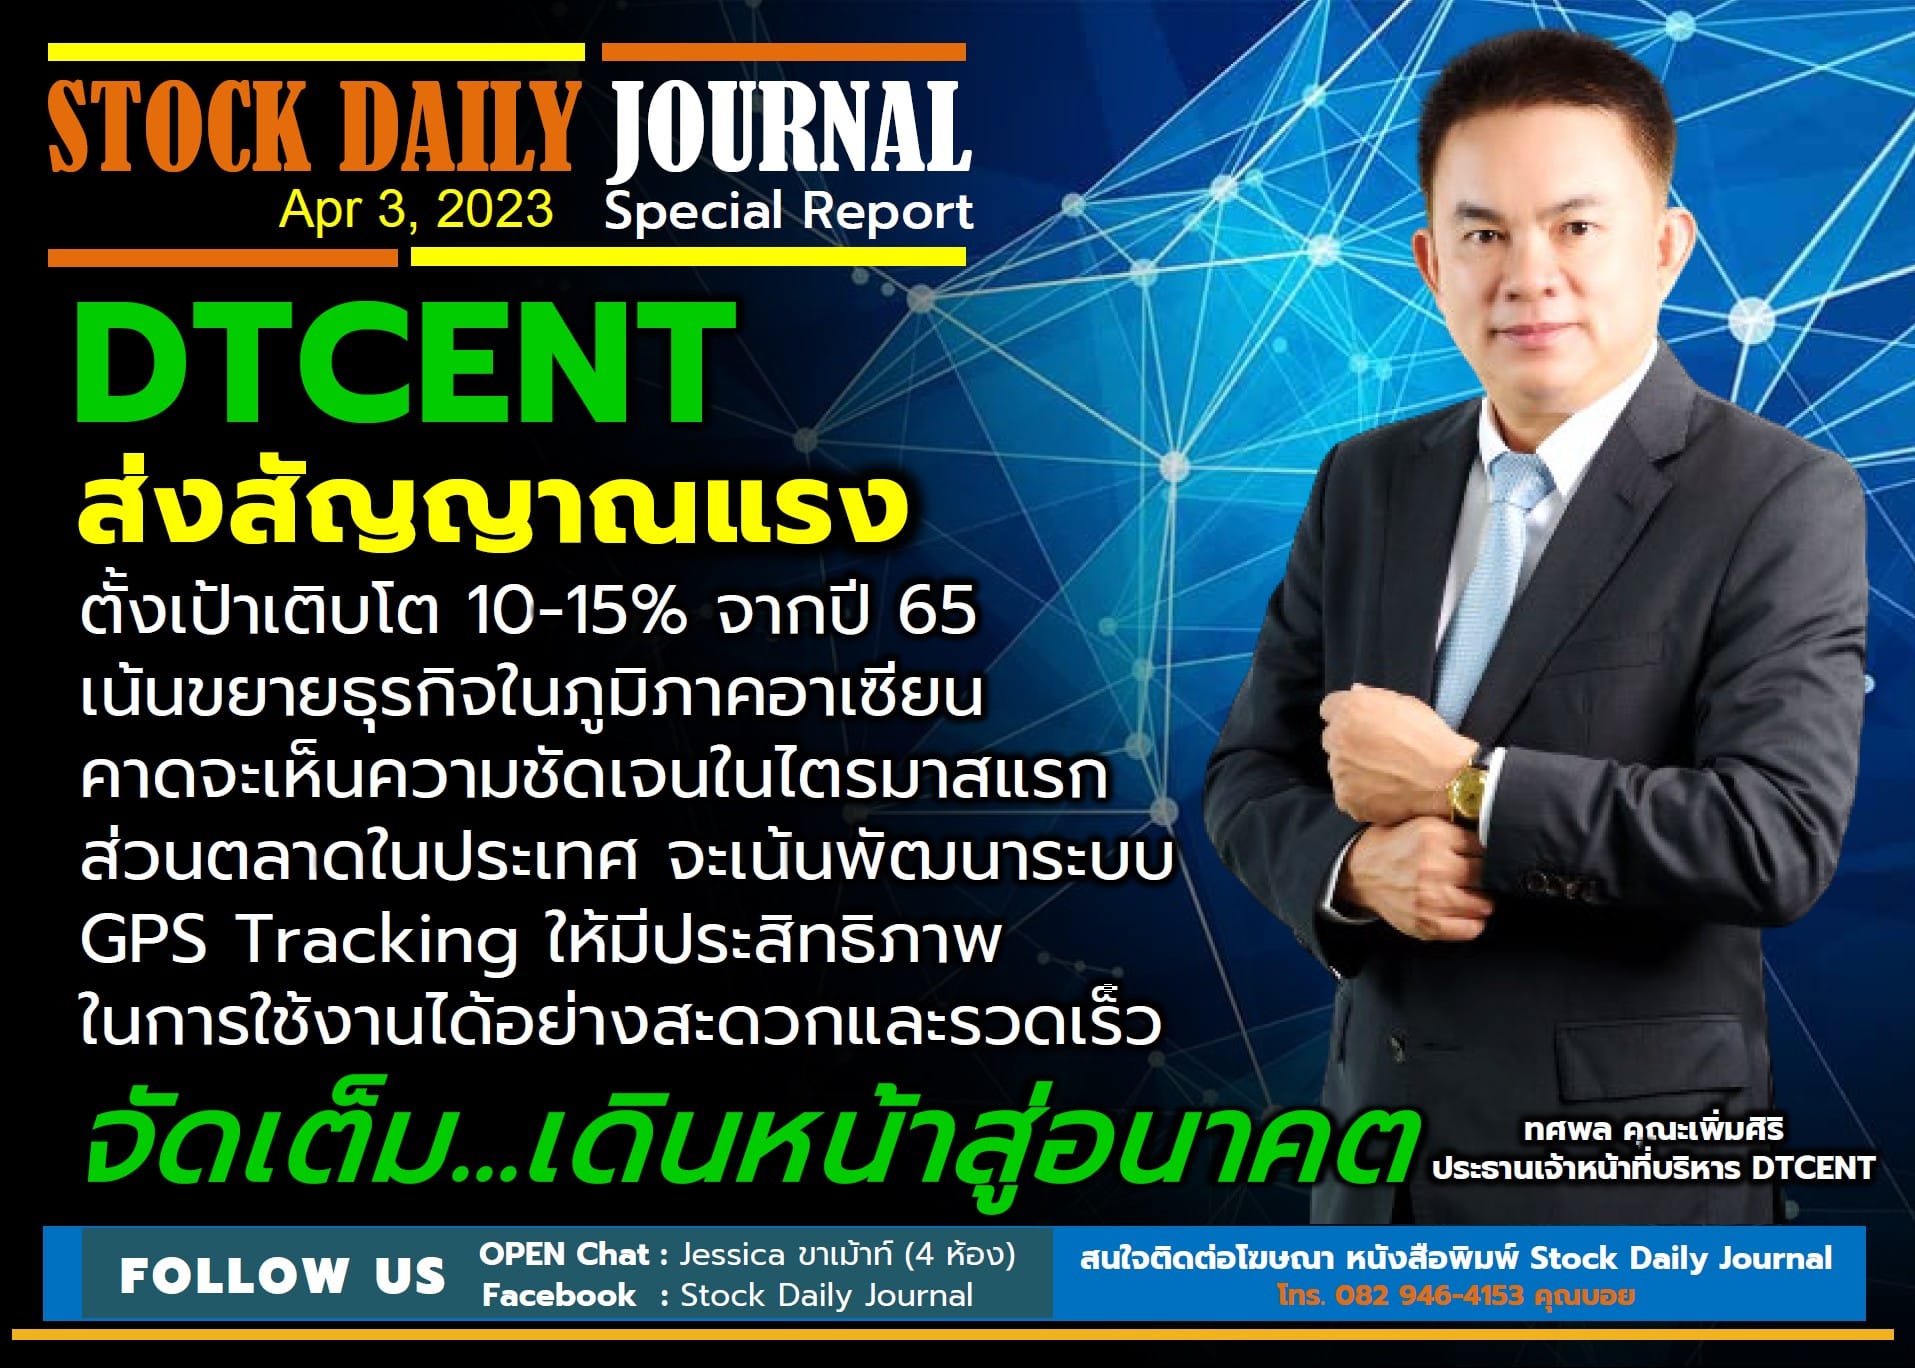 STOCK DAILY JOURNAL “Special Report : DTCENT”